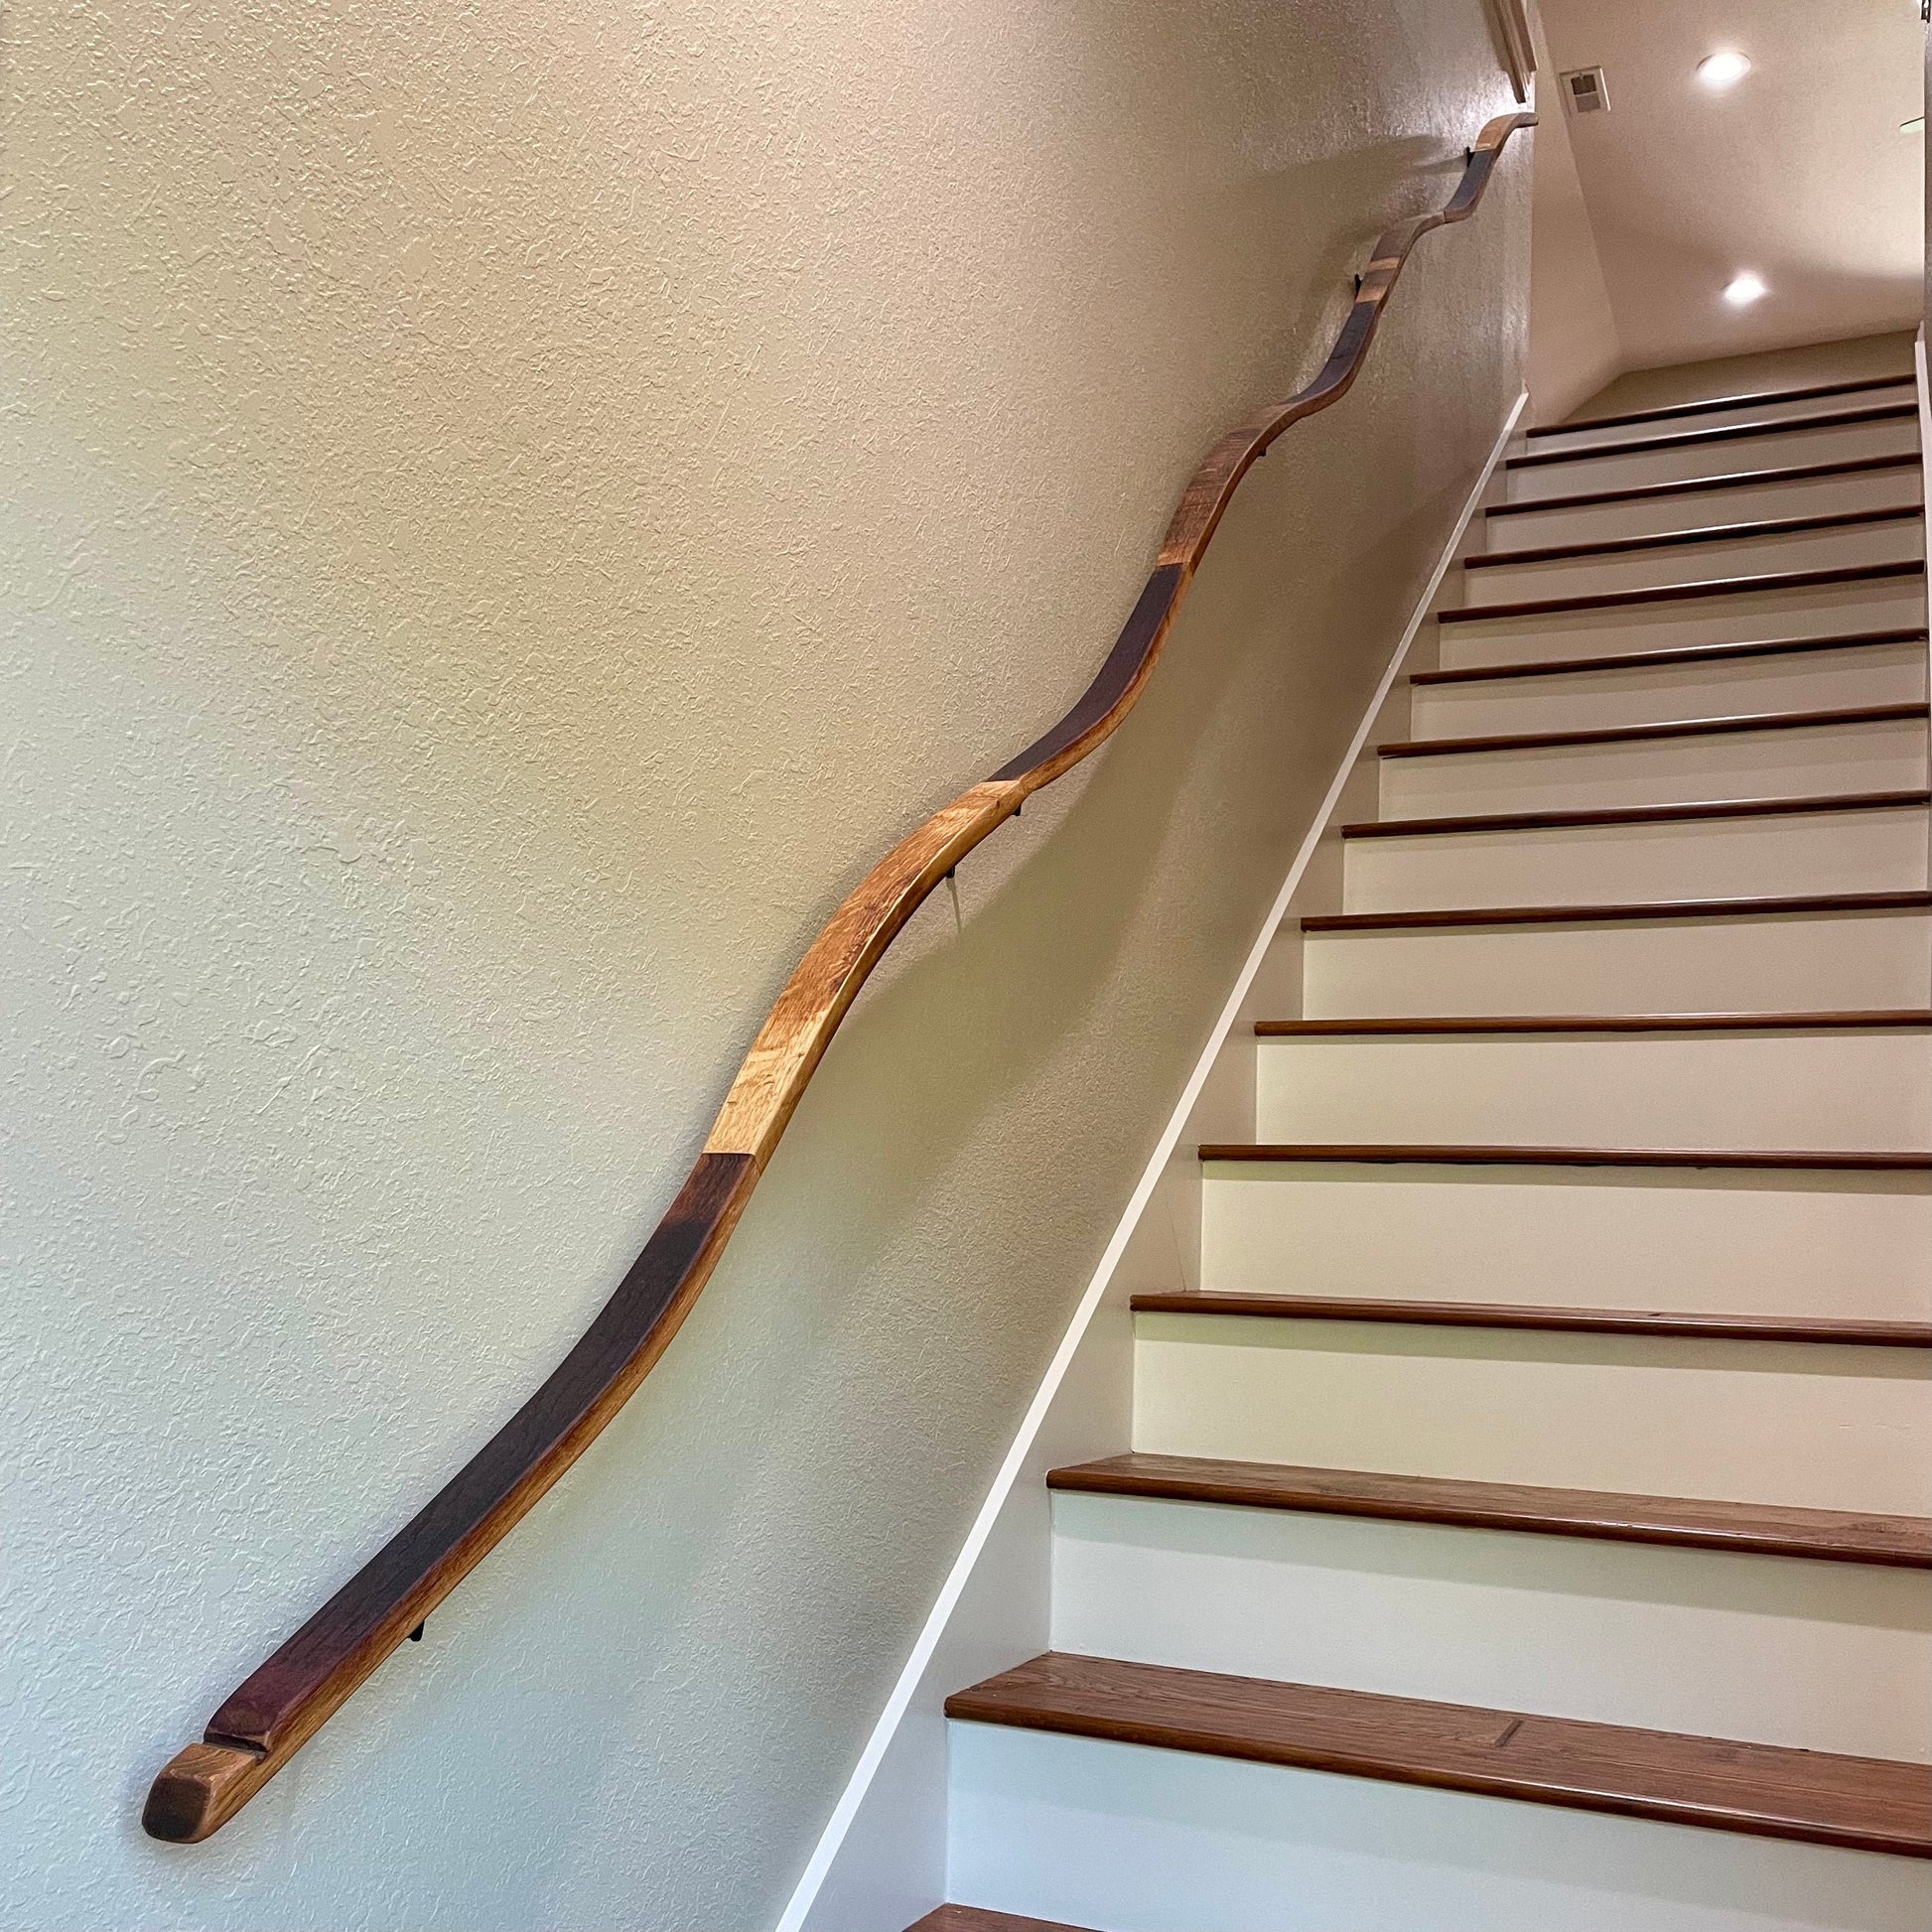 SALE Wine Barrel Stair Handrails - Barana - Made from retired California wine barrels 100% Recycled! 092223-2